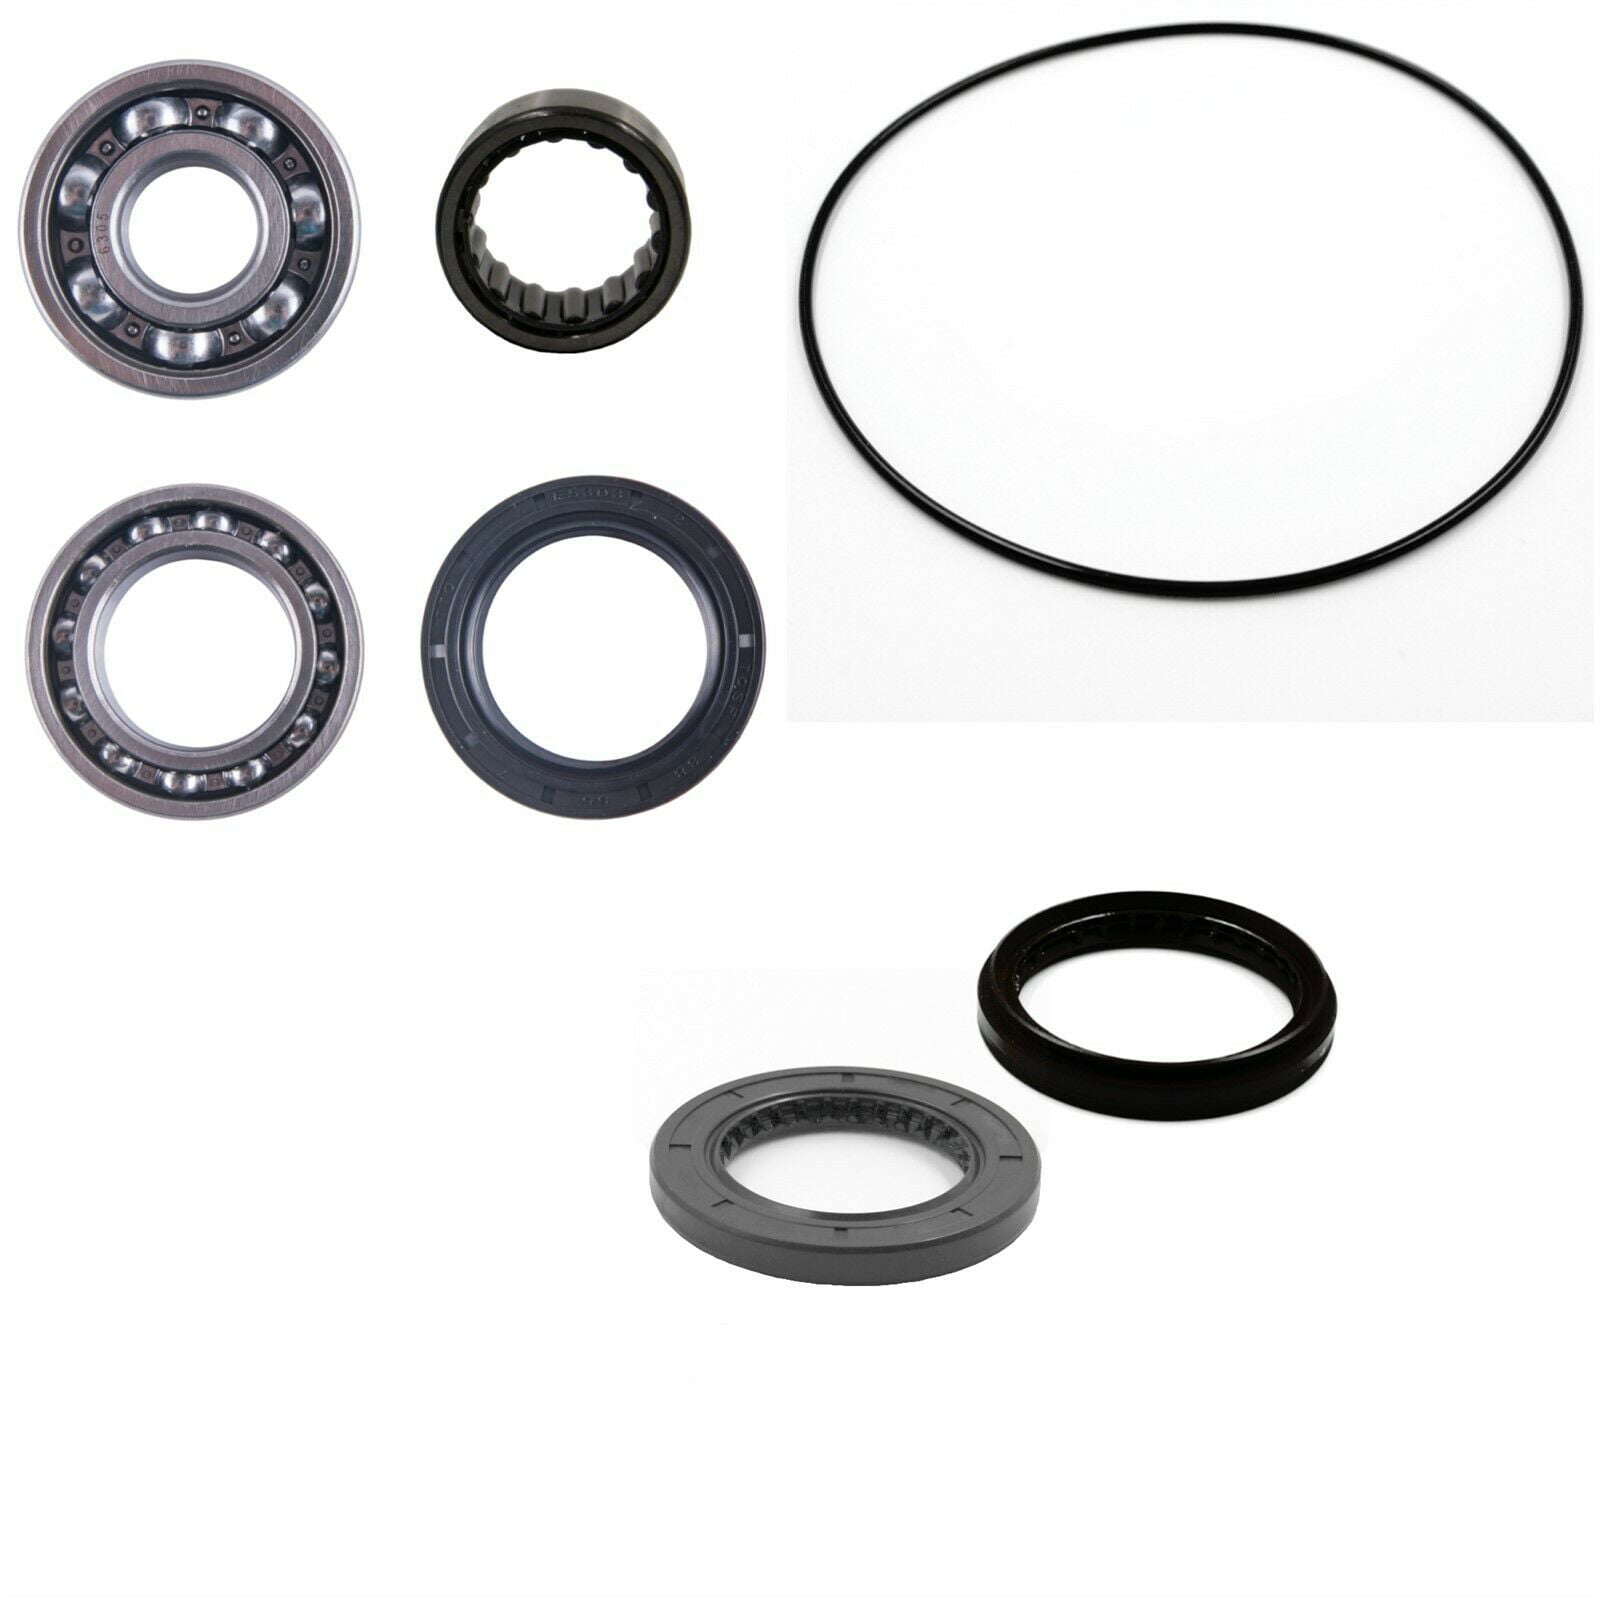 REAR DIFFERENTIAL SEAL ONLY KIT ARCTIC CAT 400 FIS AT MT TBX TRV 4X4 2004-2014